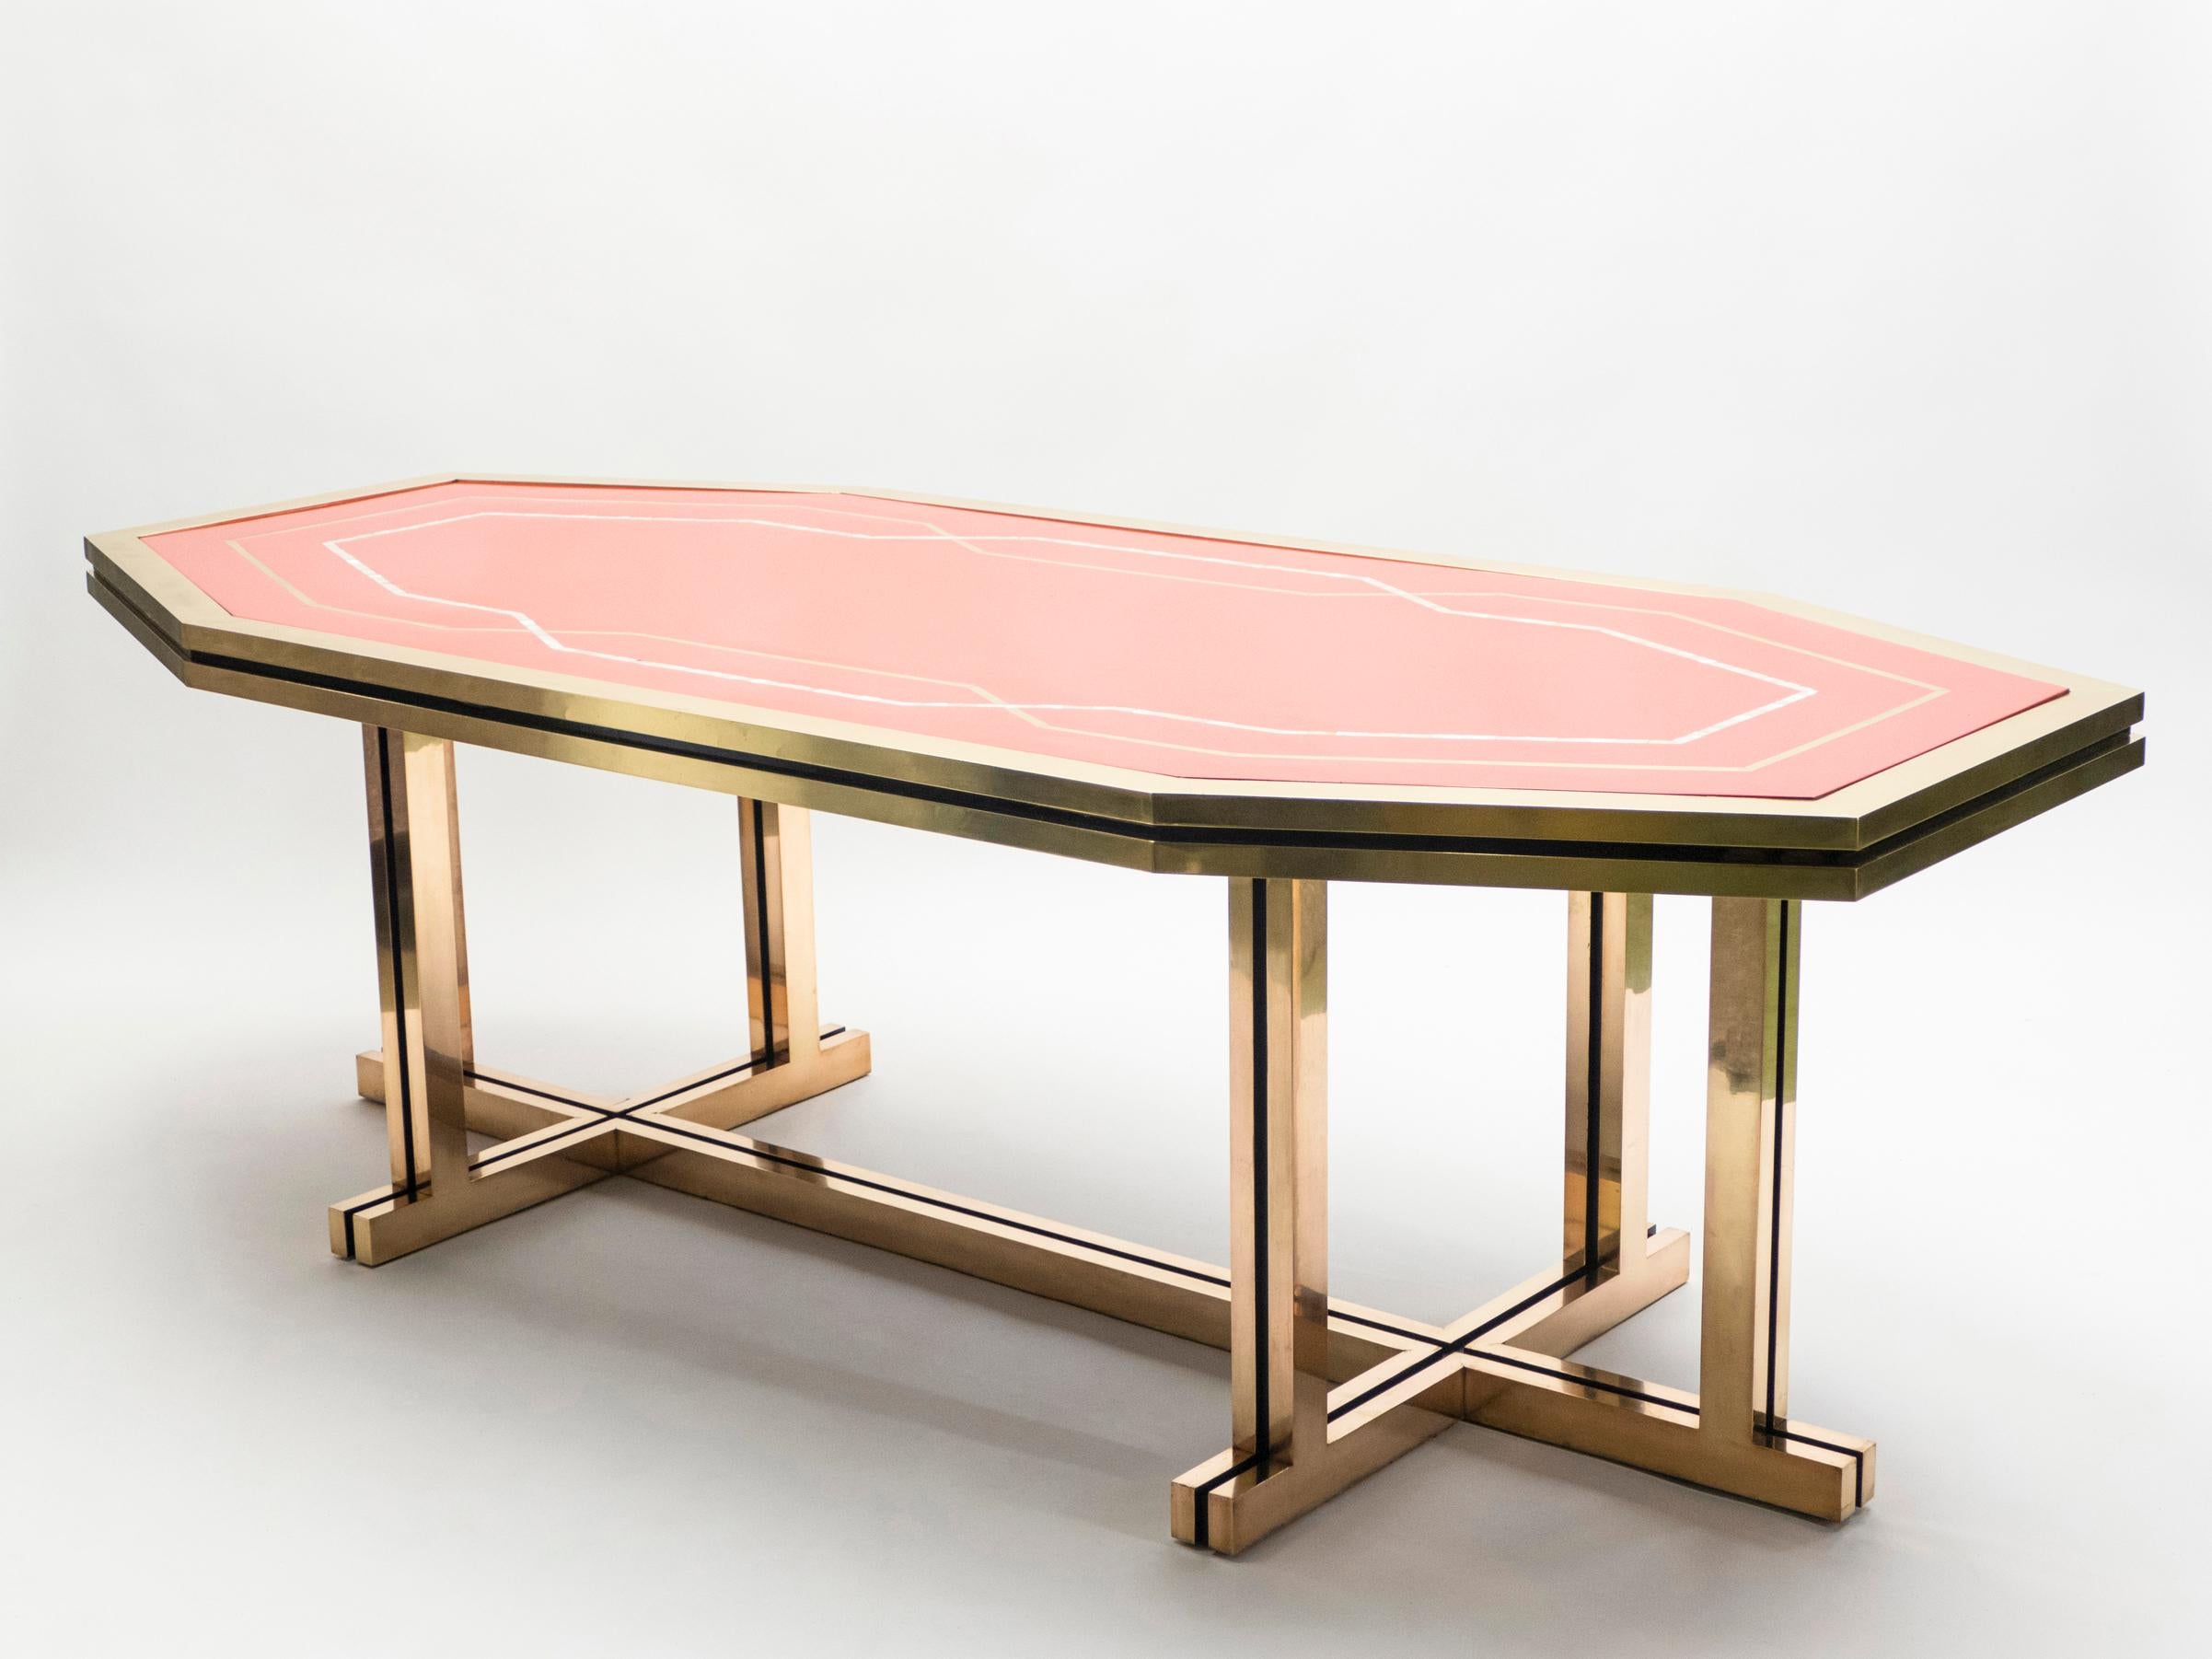 Unique Red Lacquer and Brass Maison Jansen Dining Table or Desk, 1970s For Sale 1